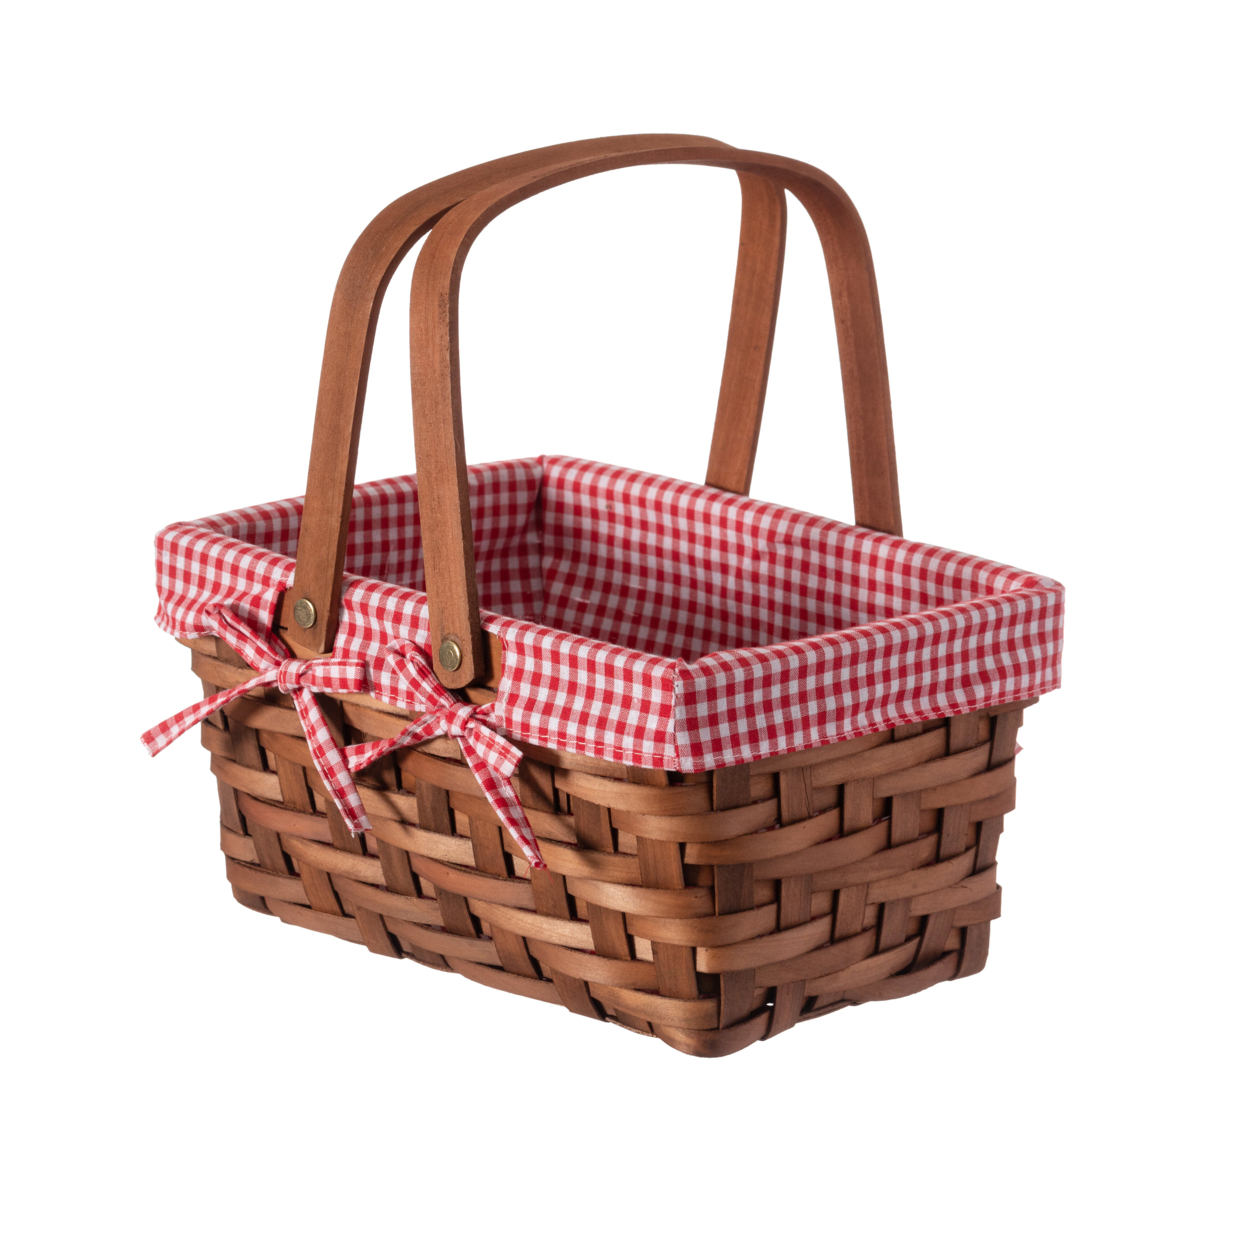 Rectangular Picnic Basket Lined With Gingham Lining - Pack Of 1